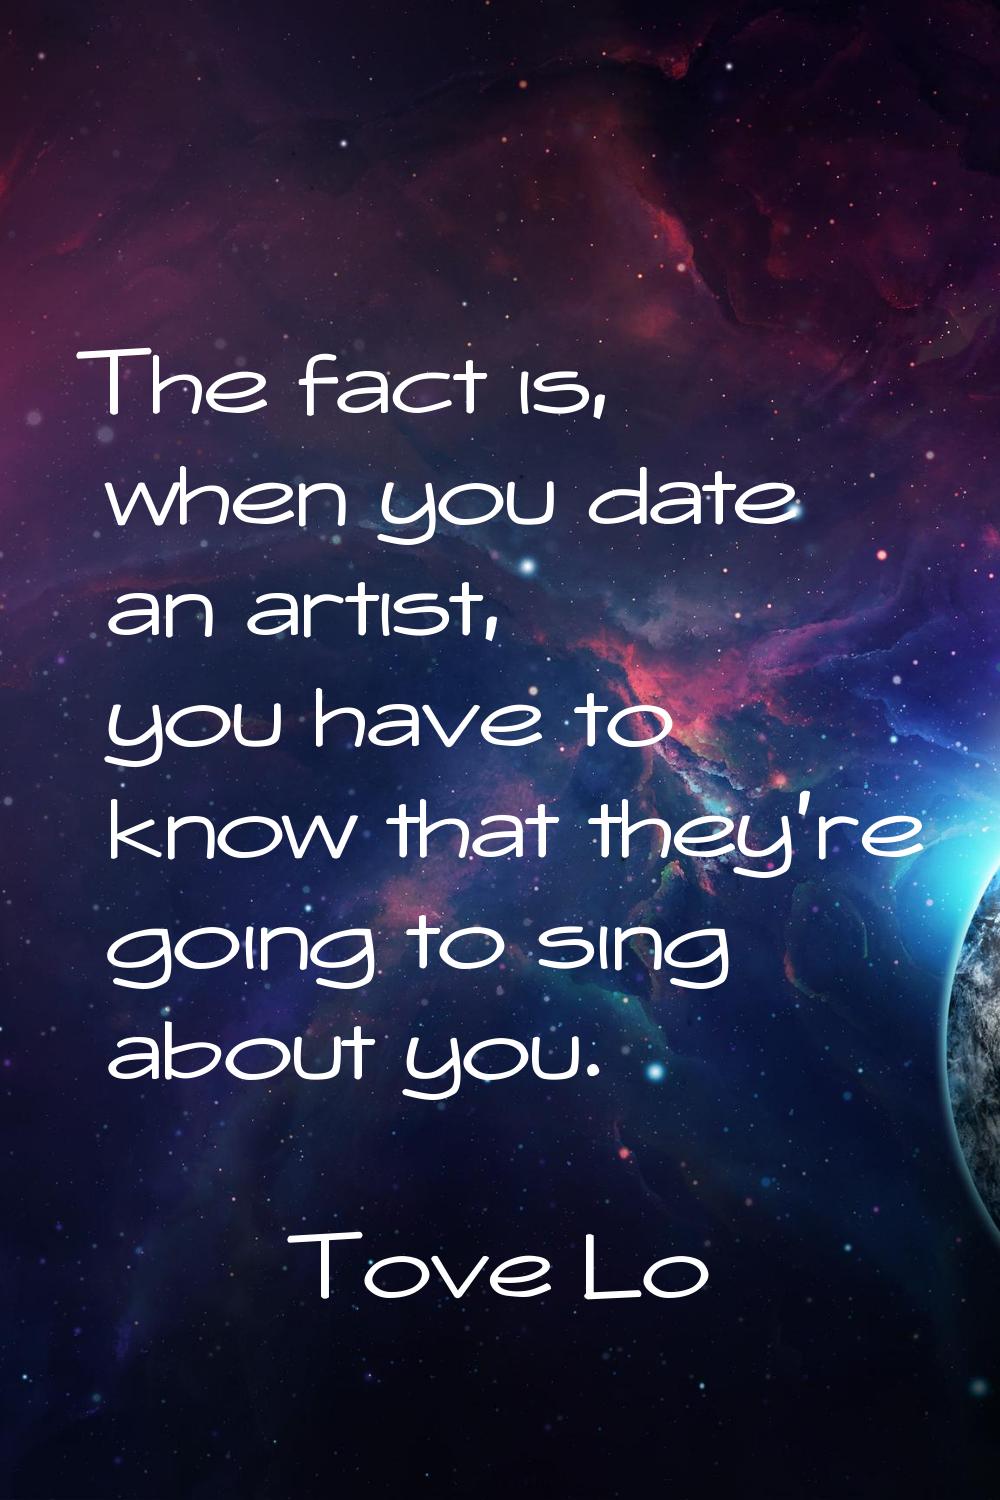 The fact is, when you date an artist, you have to know that they're going to sing about you.